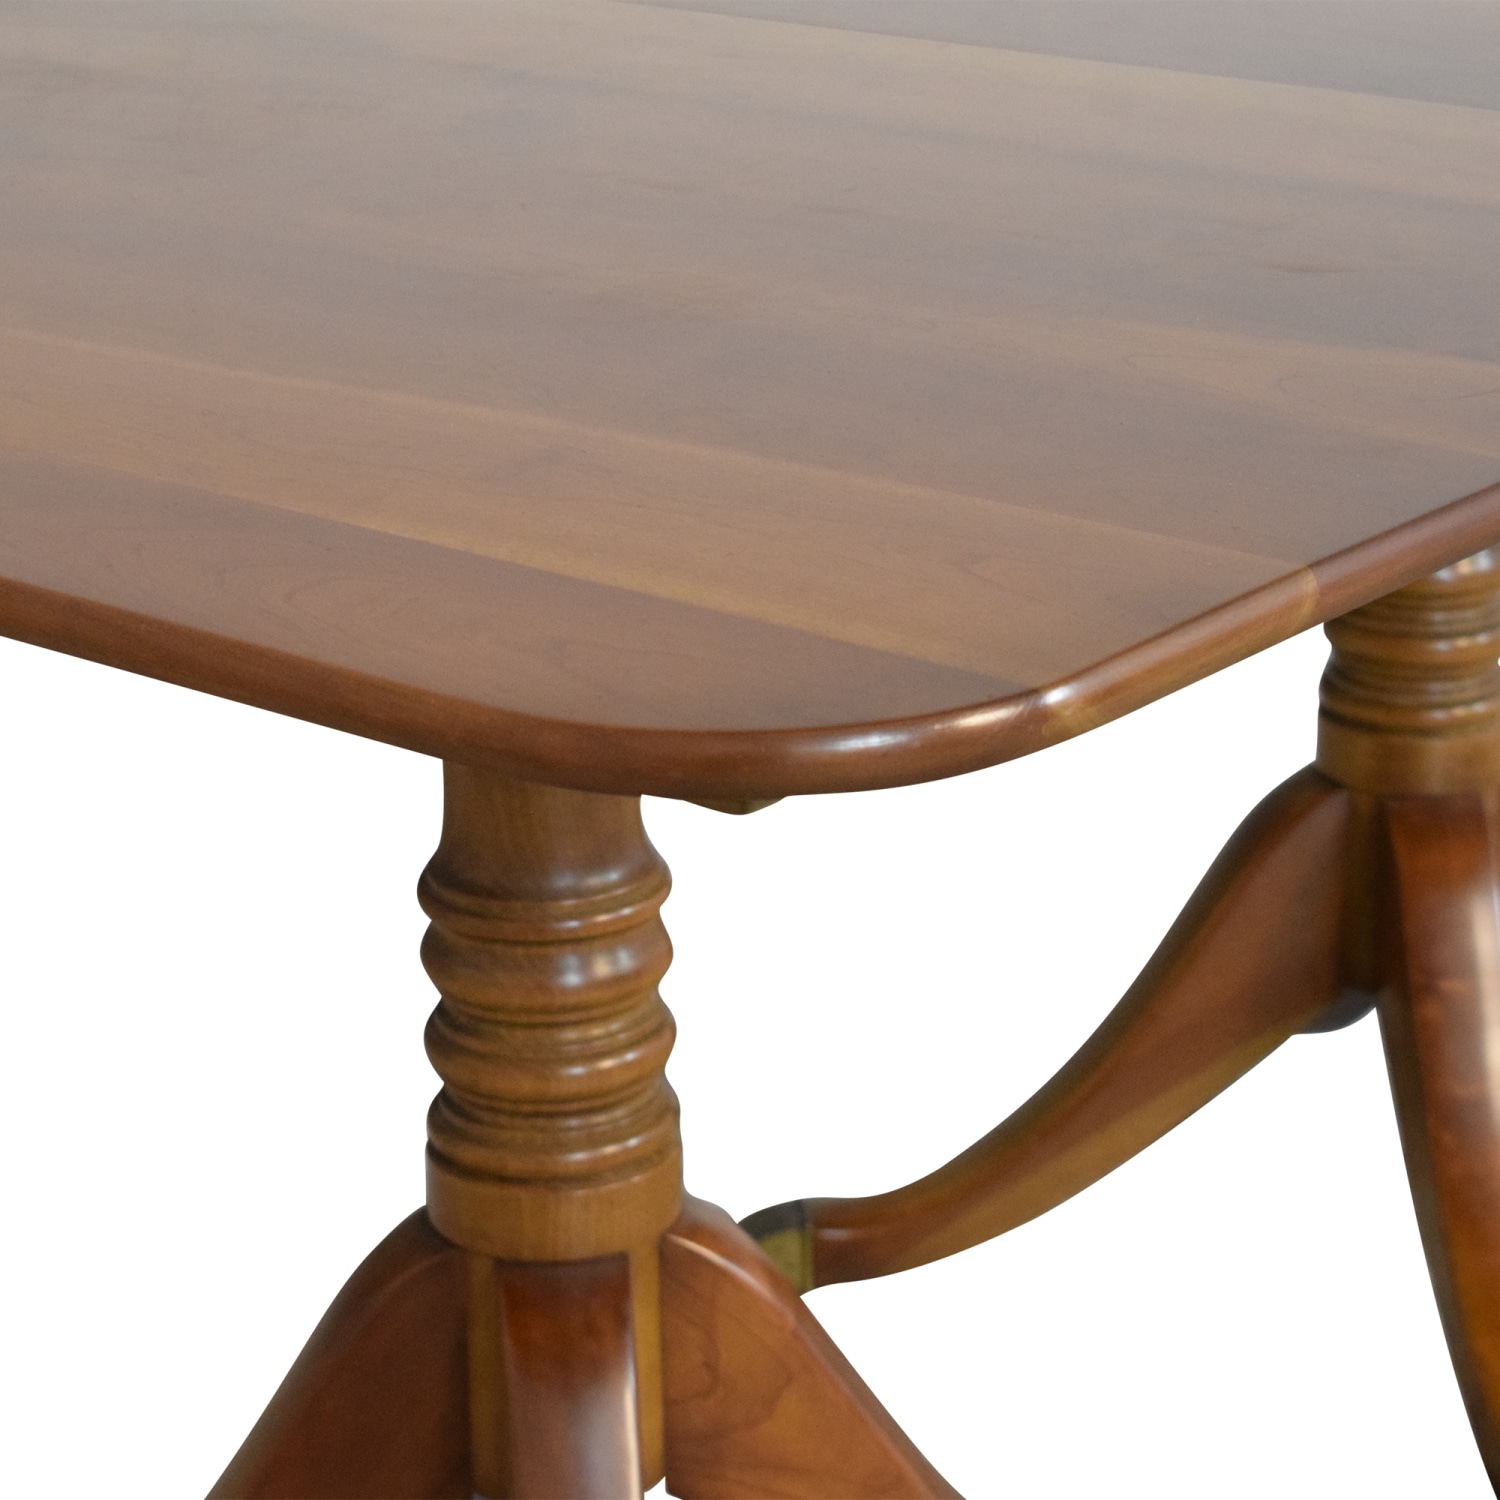 Stickley Furniture Double Pedestal Extendable Dining Table sale